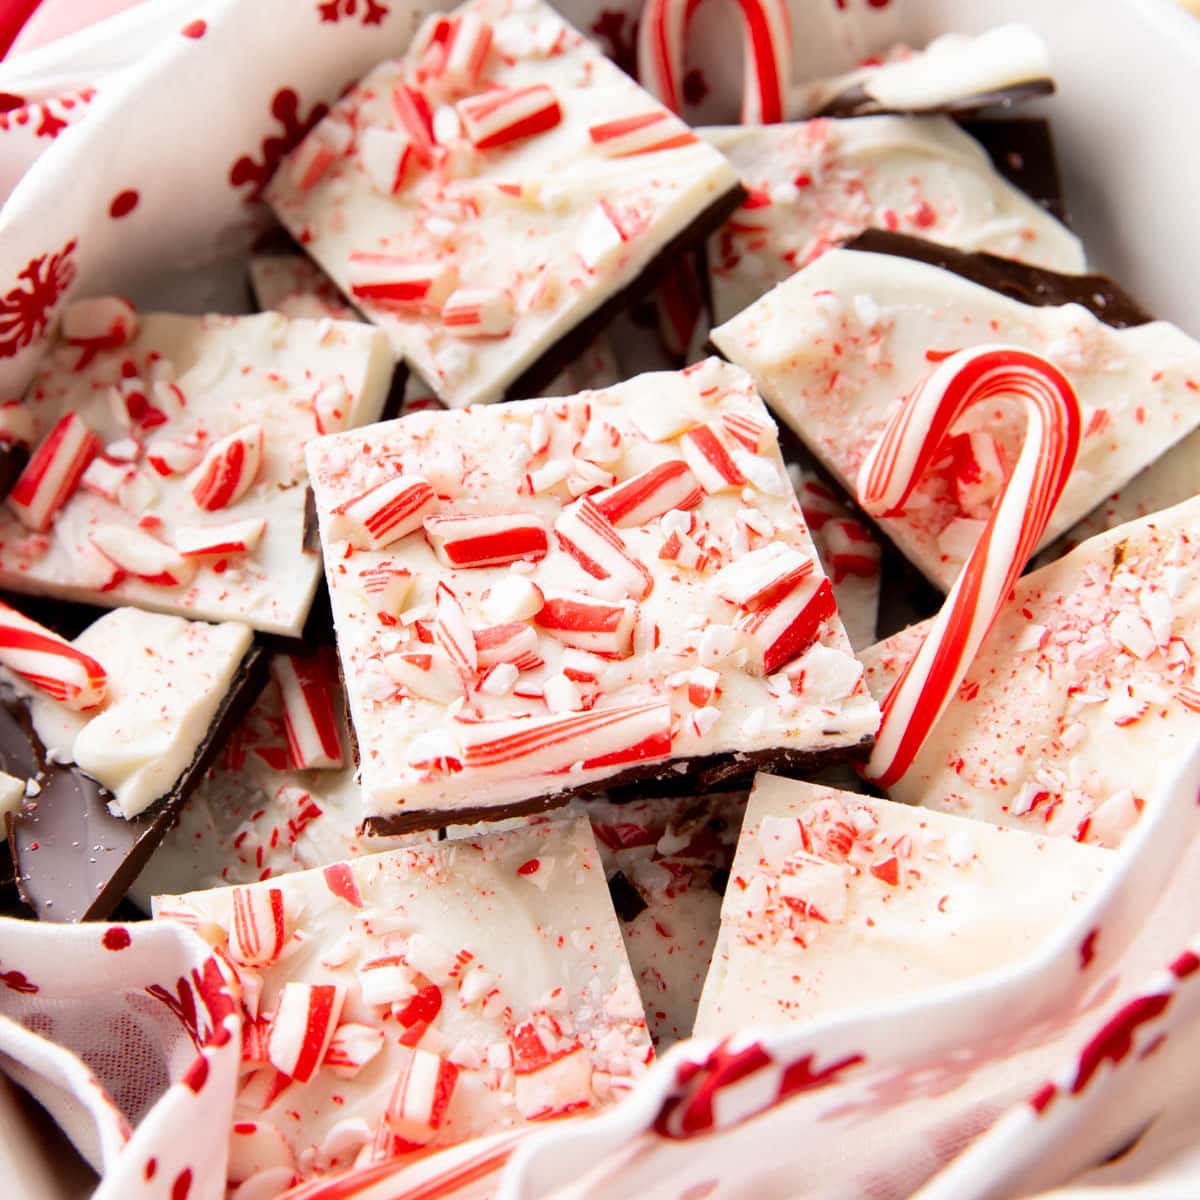 Cascades of peppermint bark pieces in a candy dish with mini candy canes